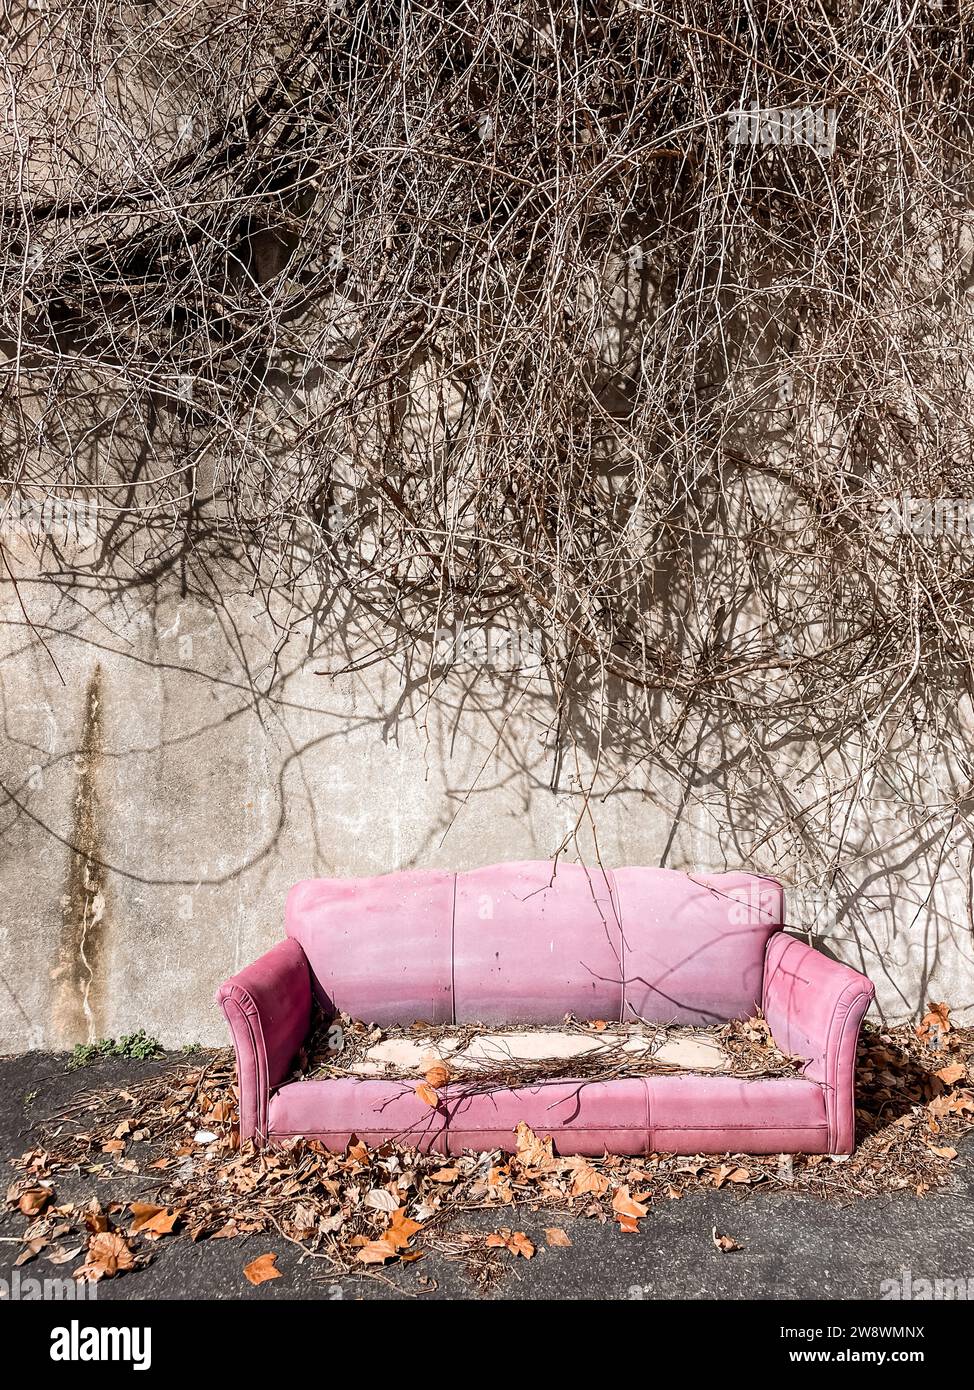 Old abandoned pink couch sitting outside under overgrown vines Stock Photo